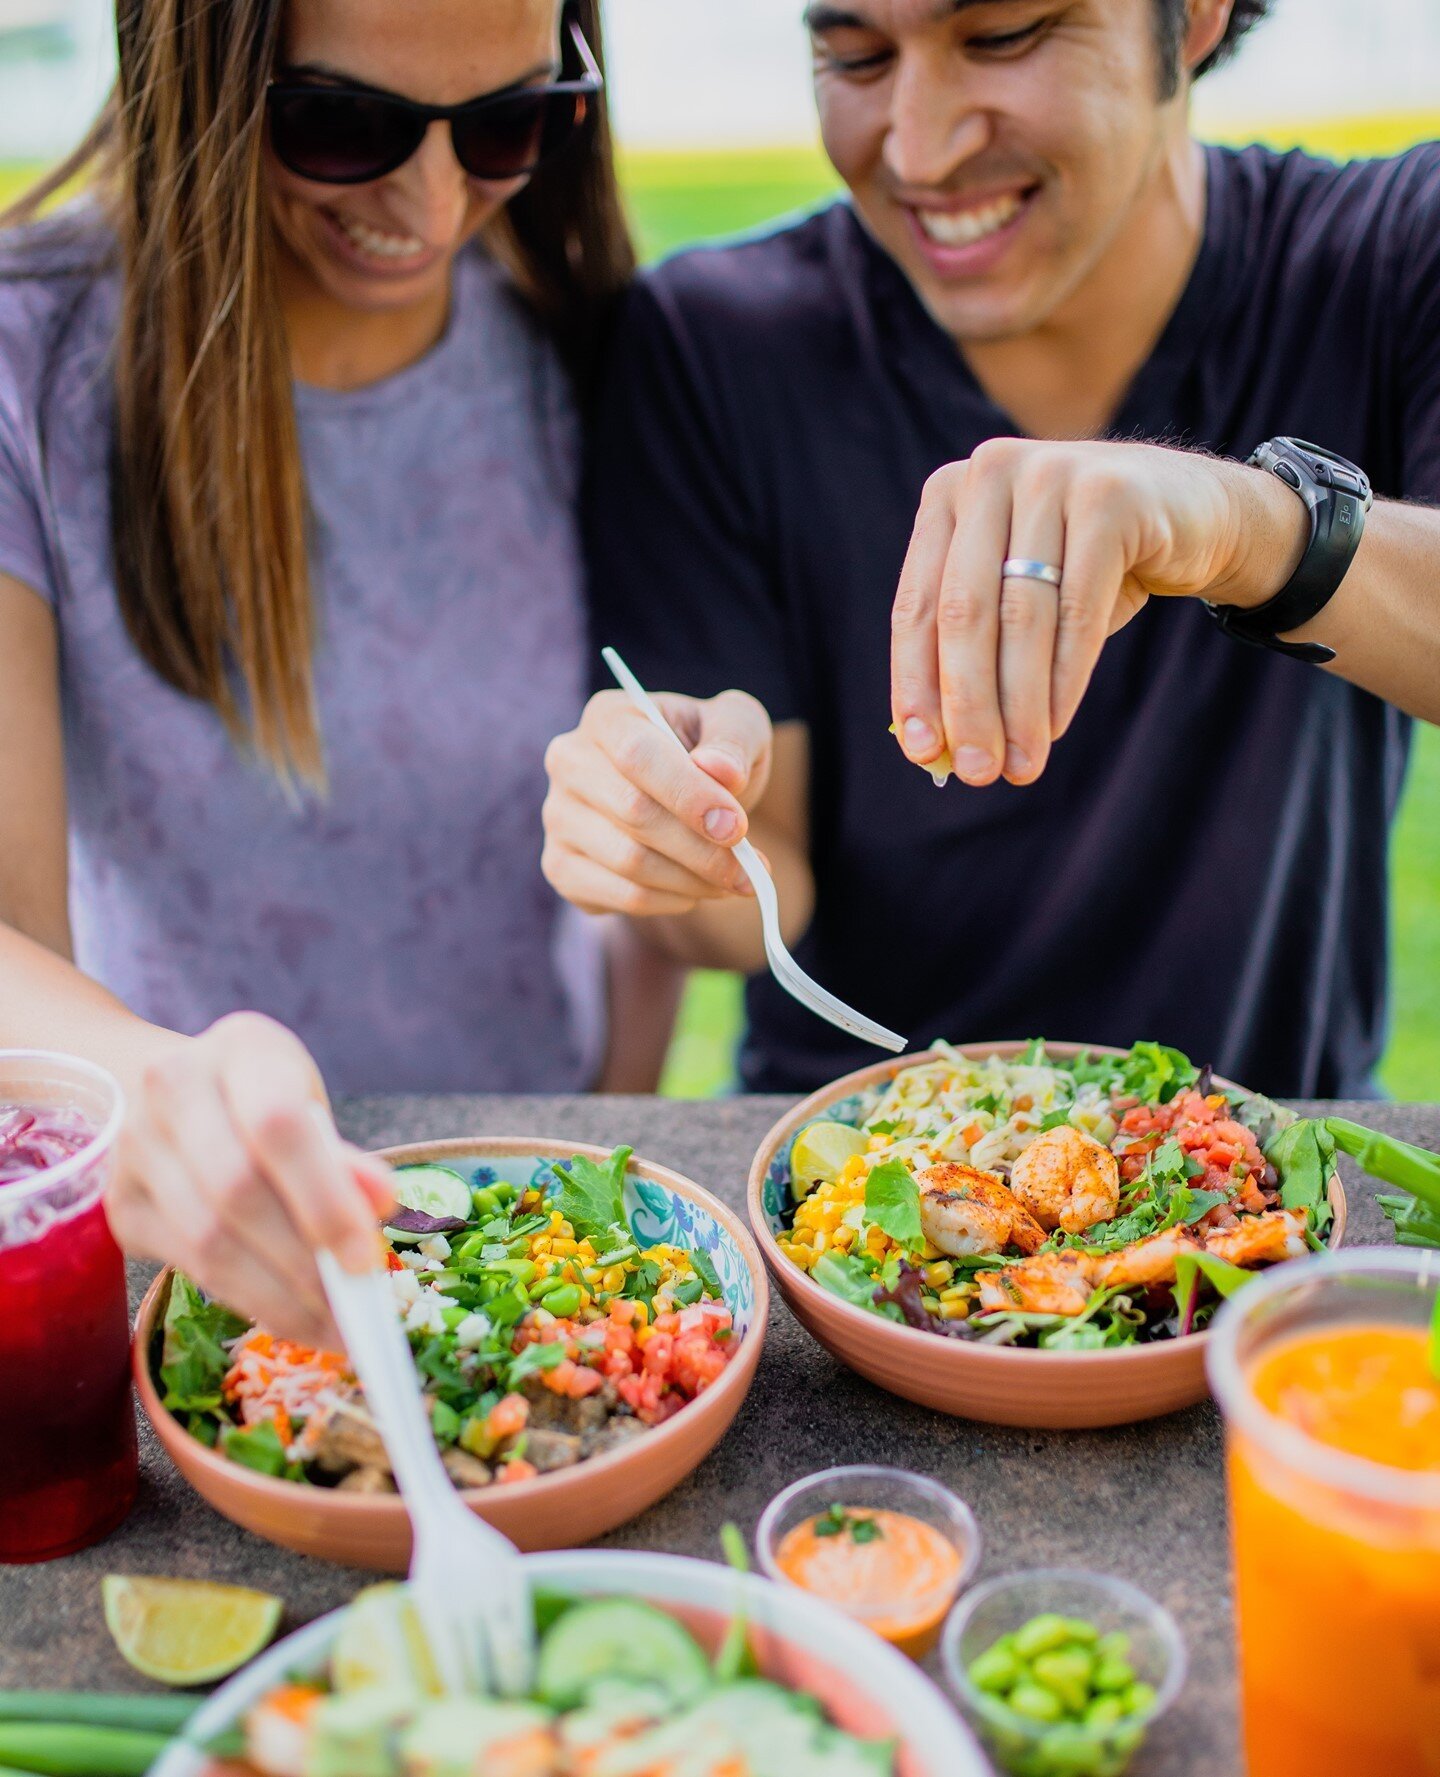 💚 SUNDAY DATE 💚 Grab your loved one, pick up some fresh Heritage Eats salads and cold house made drinks, and head to your favorite Napa park for an instant (and tasty) day date!⁠
⁠
💚 Order Heritage Eats for delivery or pick up!  Go to www.heritage